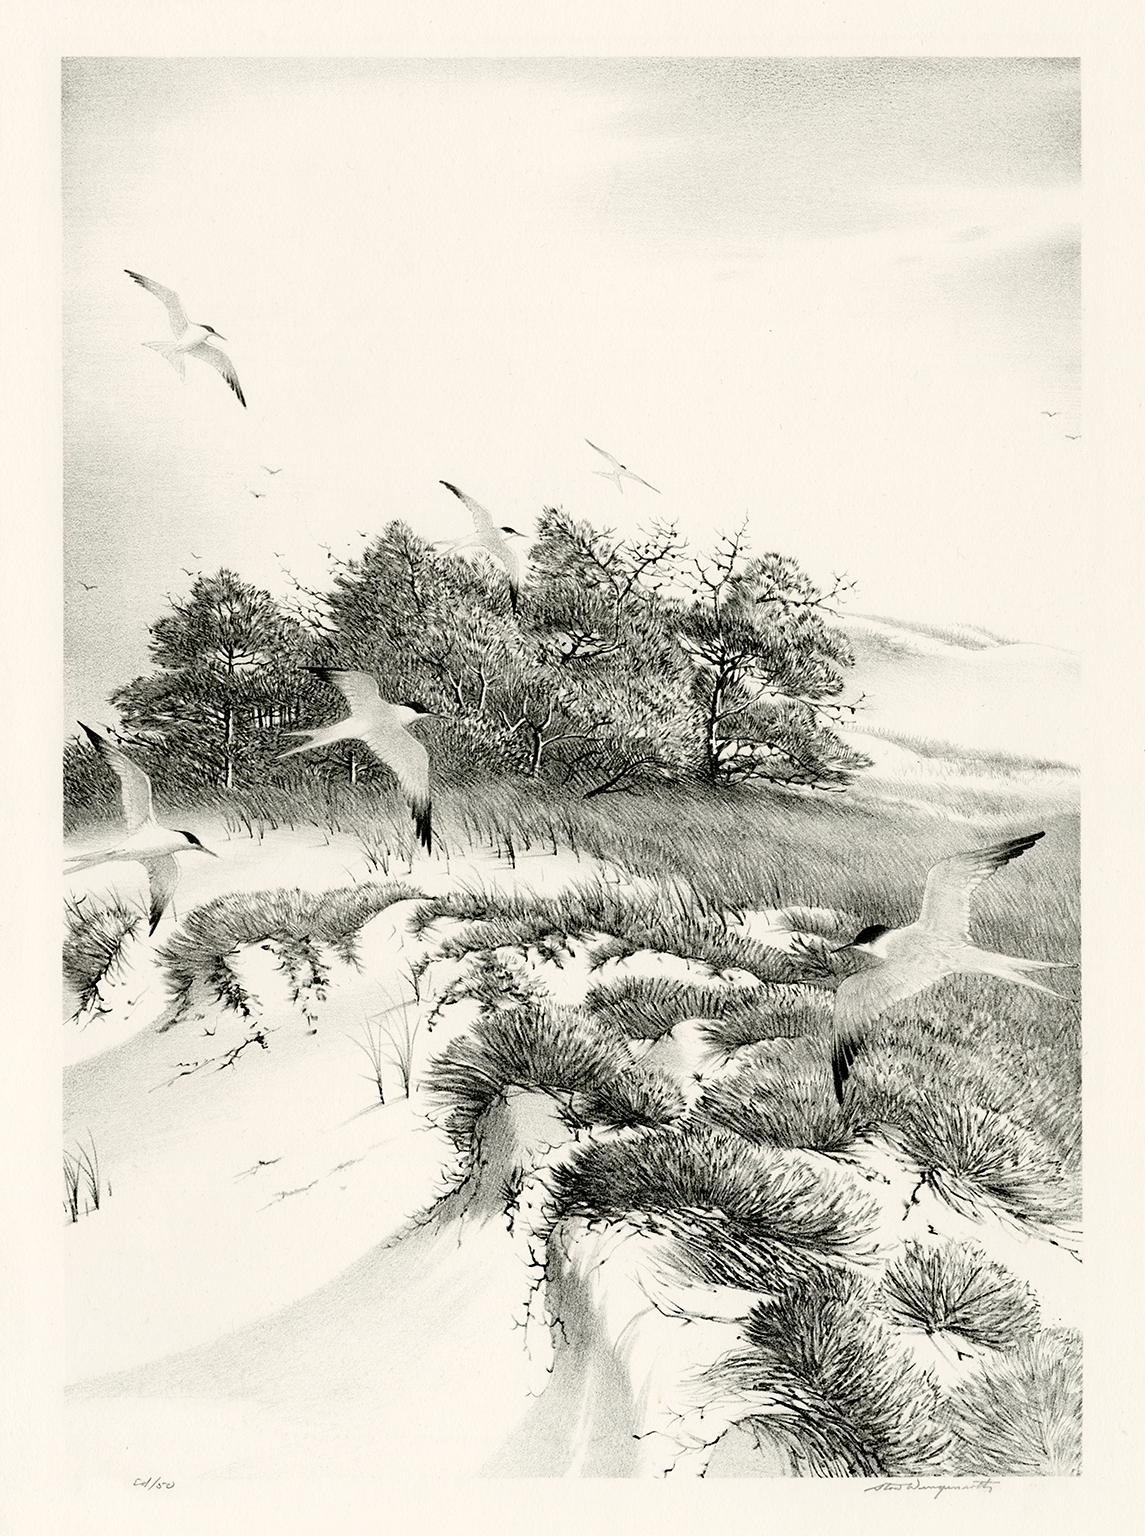 Stow Wengenroth Landscape Print - In from the Sea